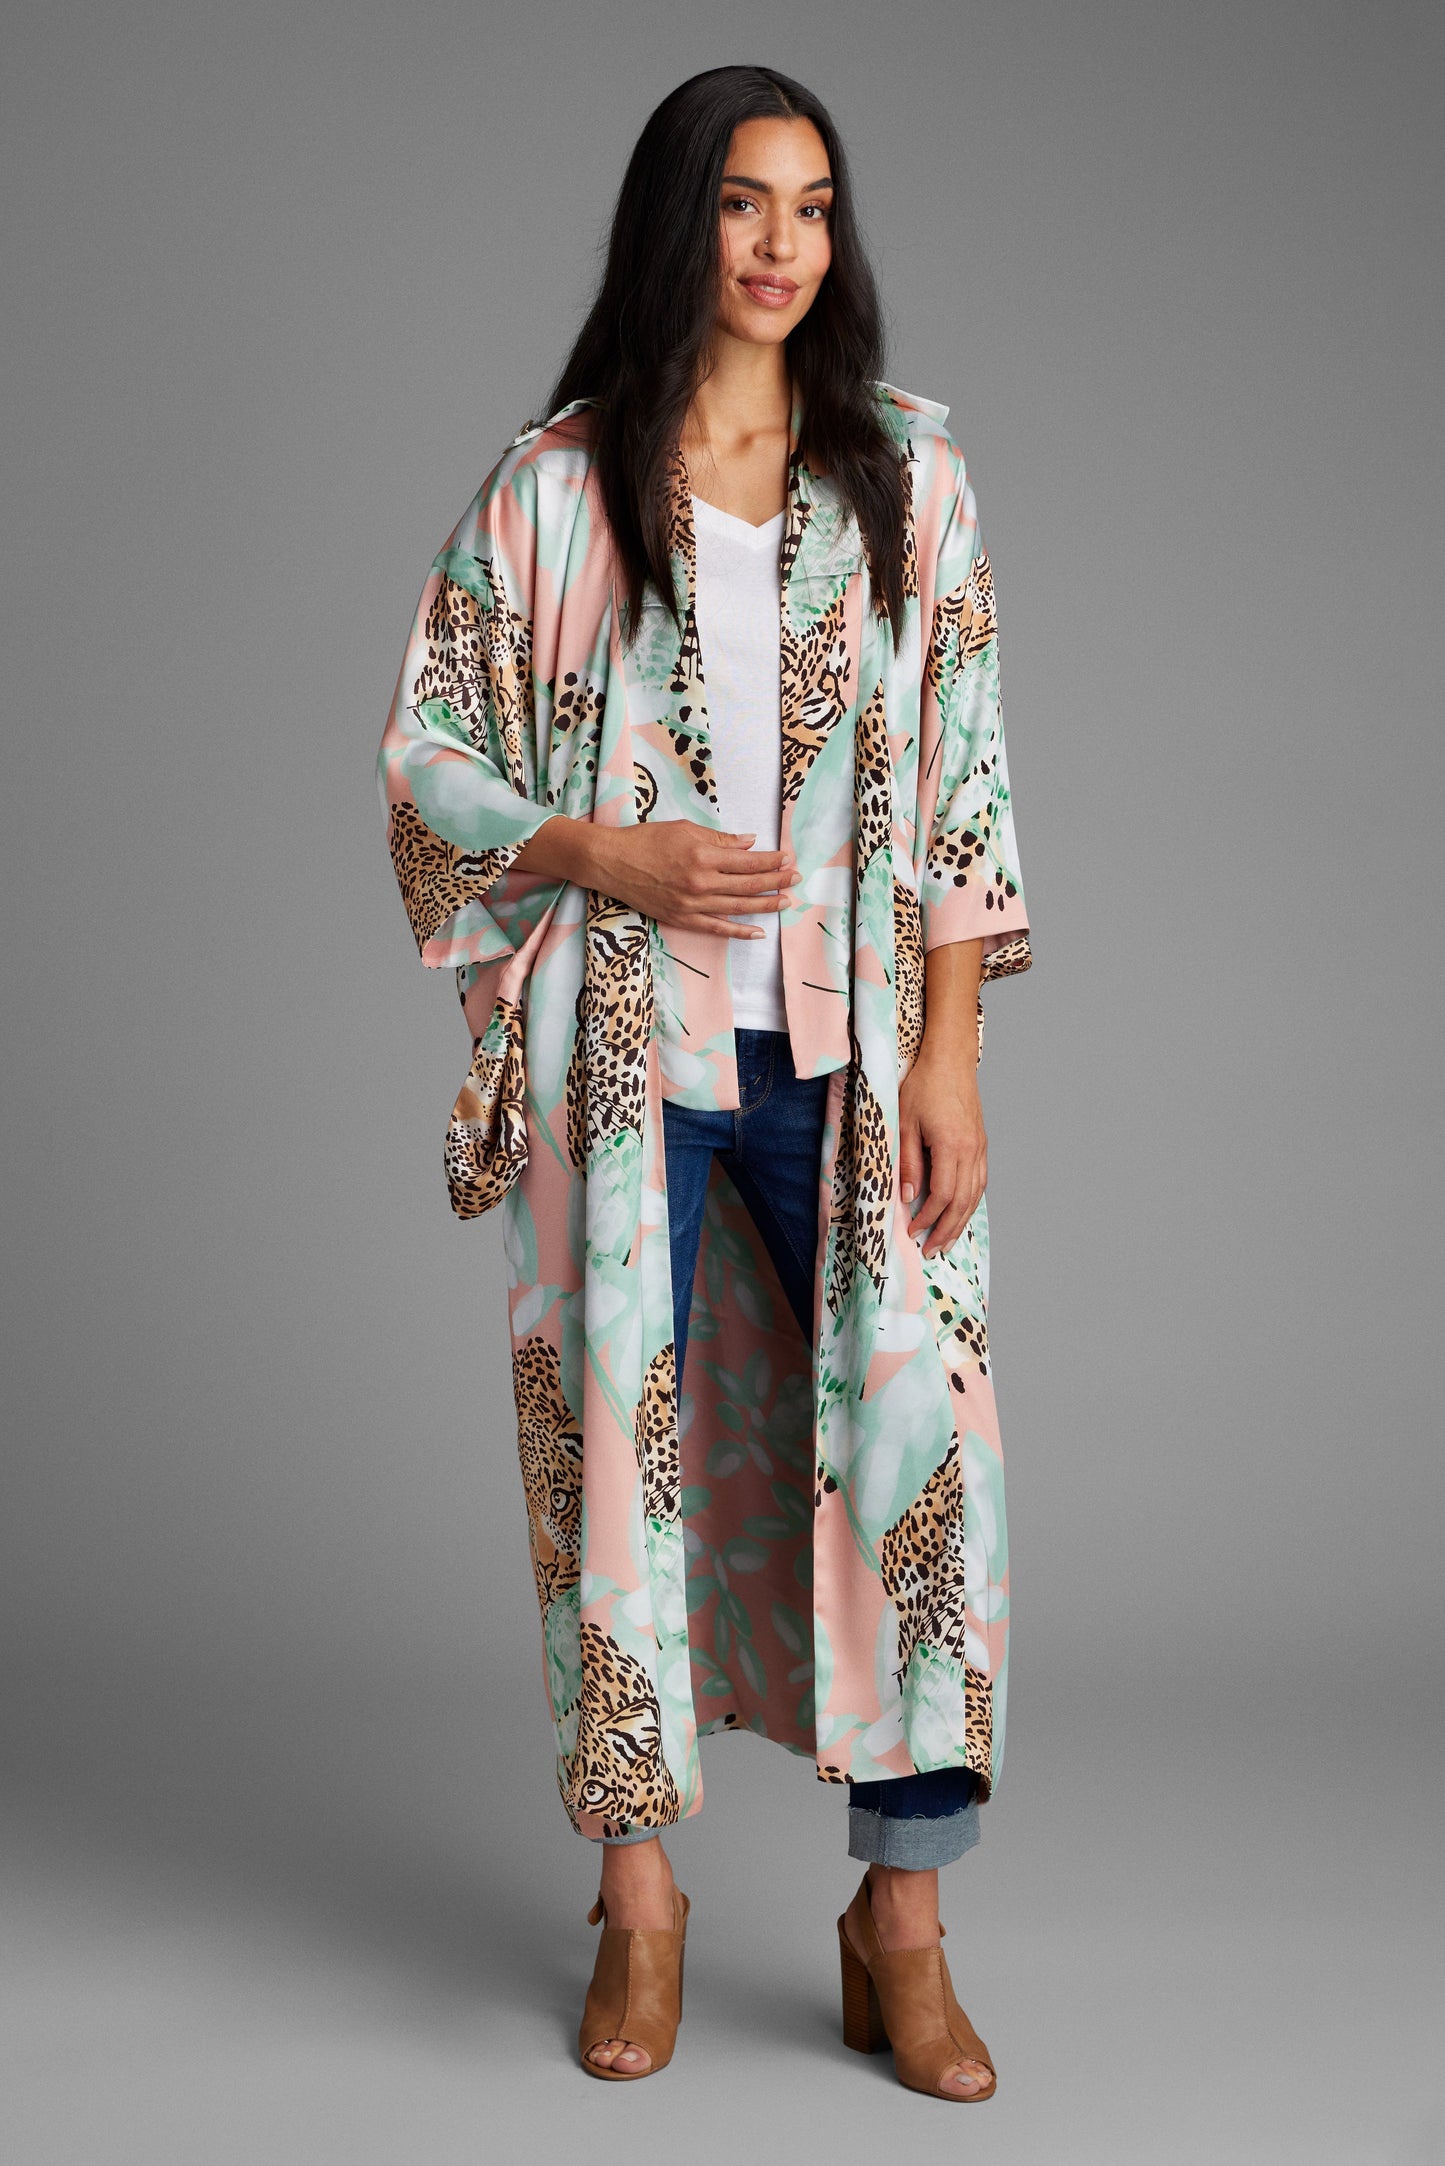 Woman standing wearing an all over tropical animal print kimono duster made from recycled textiles